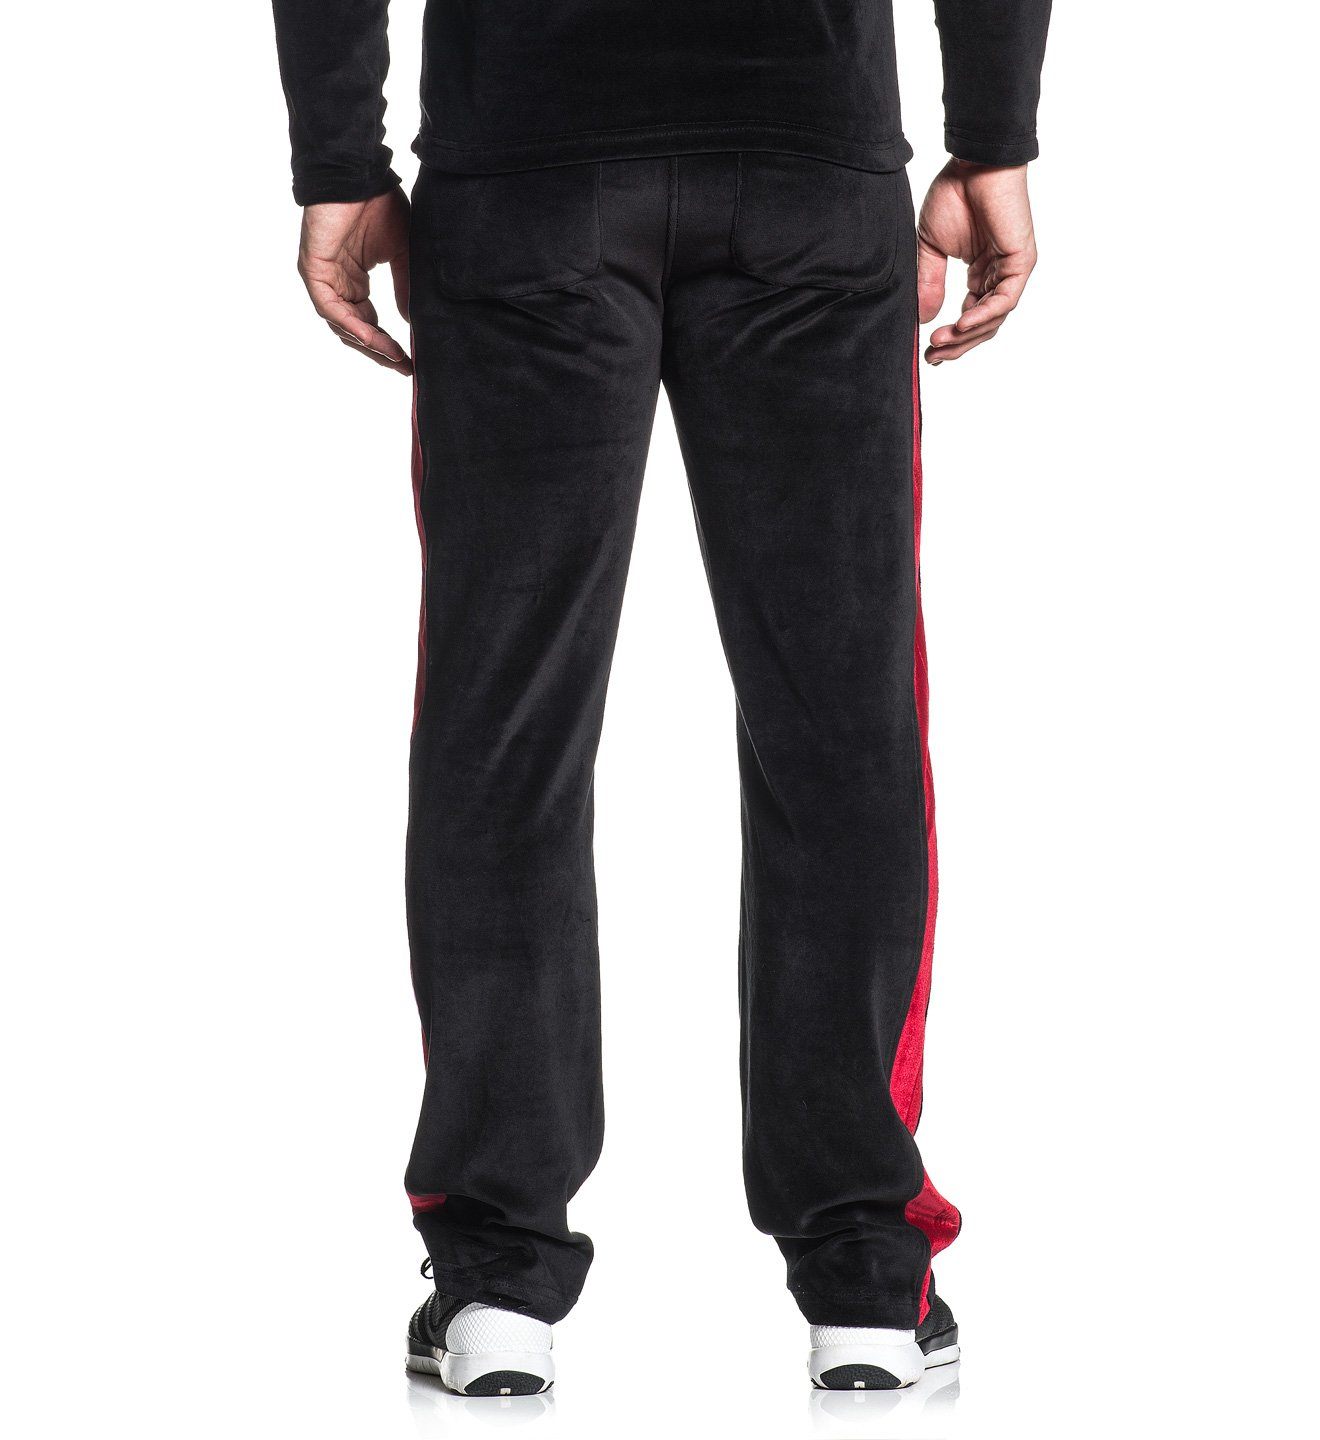 Striker Pants - Mens Track Jackets And Pants - American Fighter